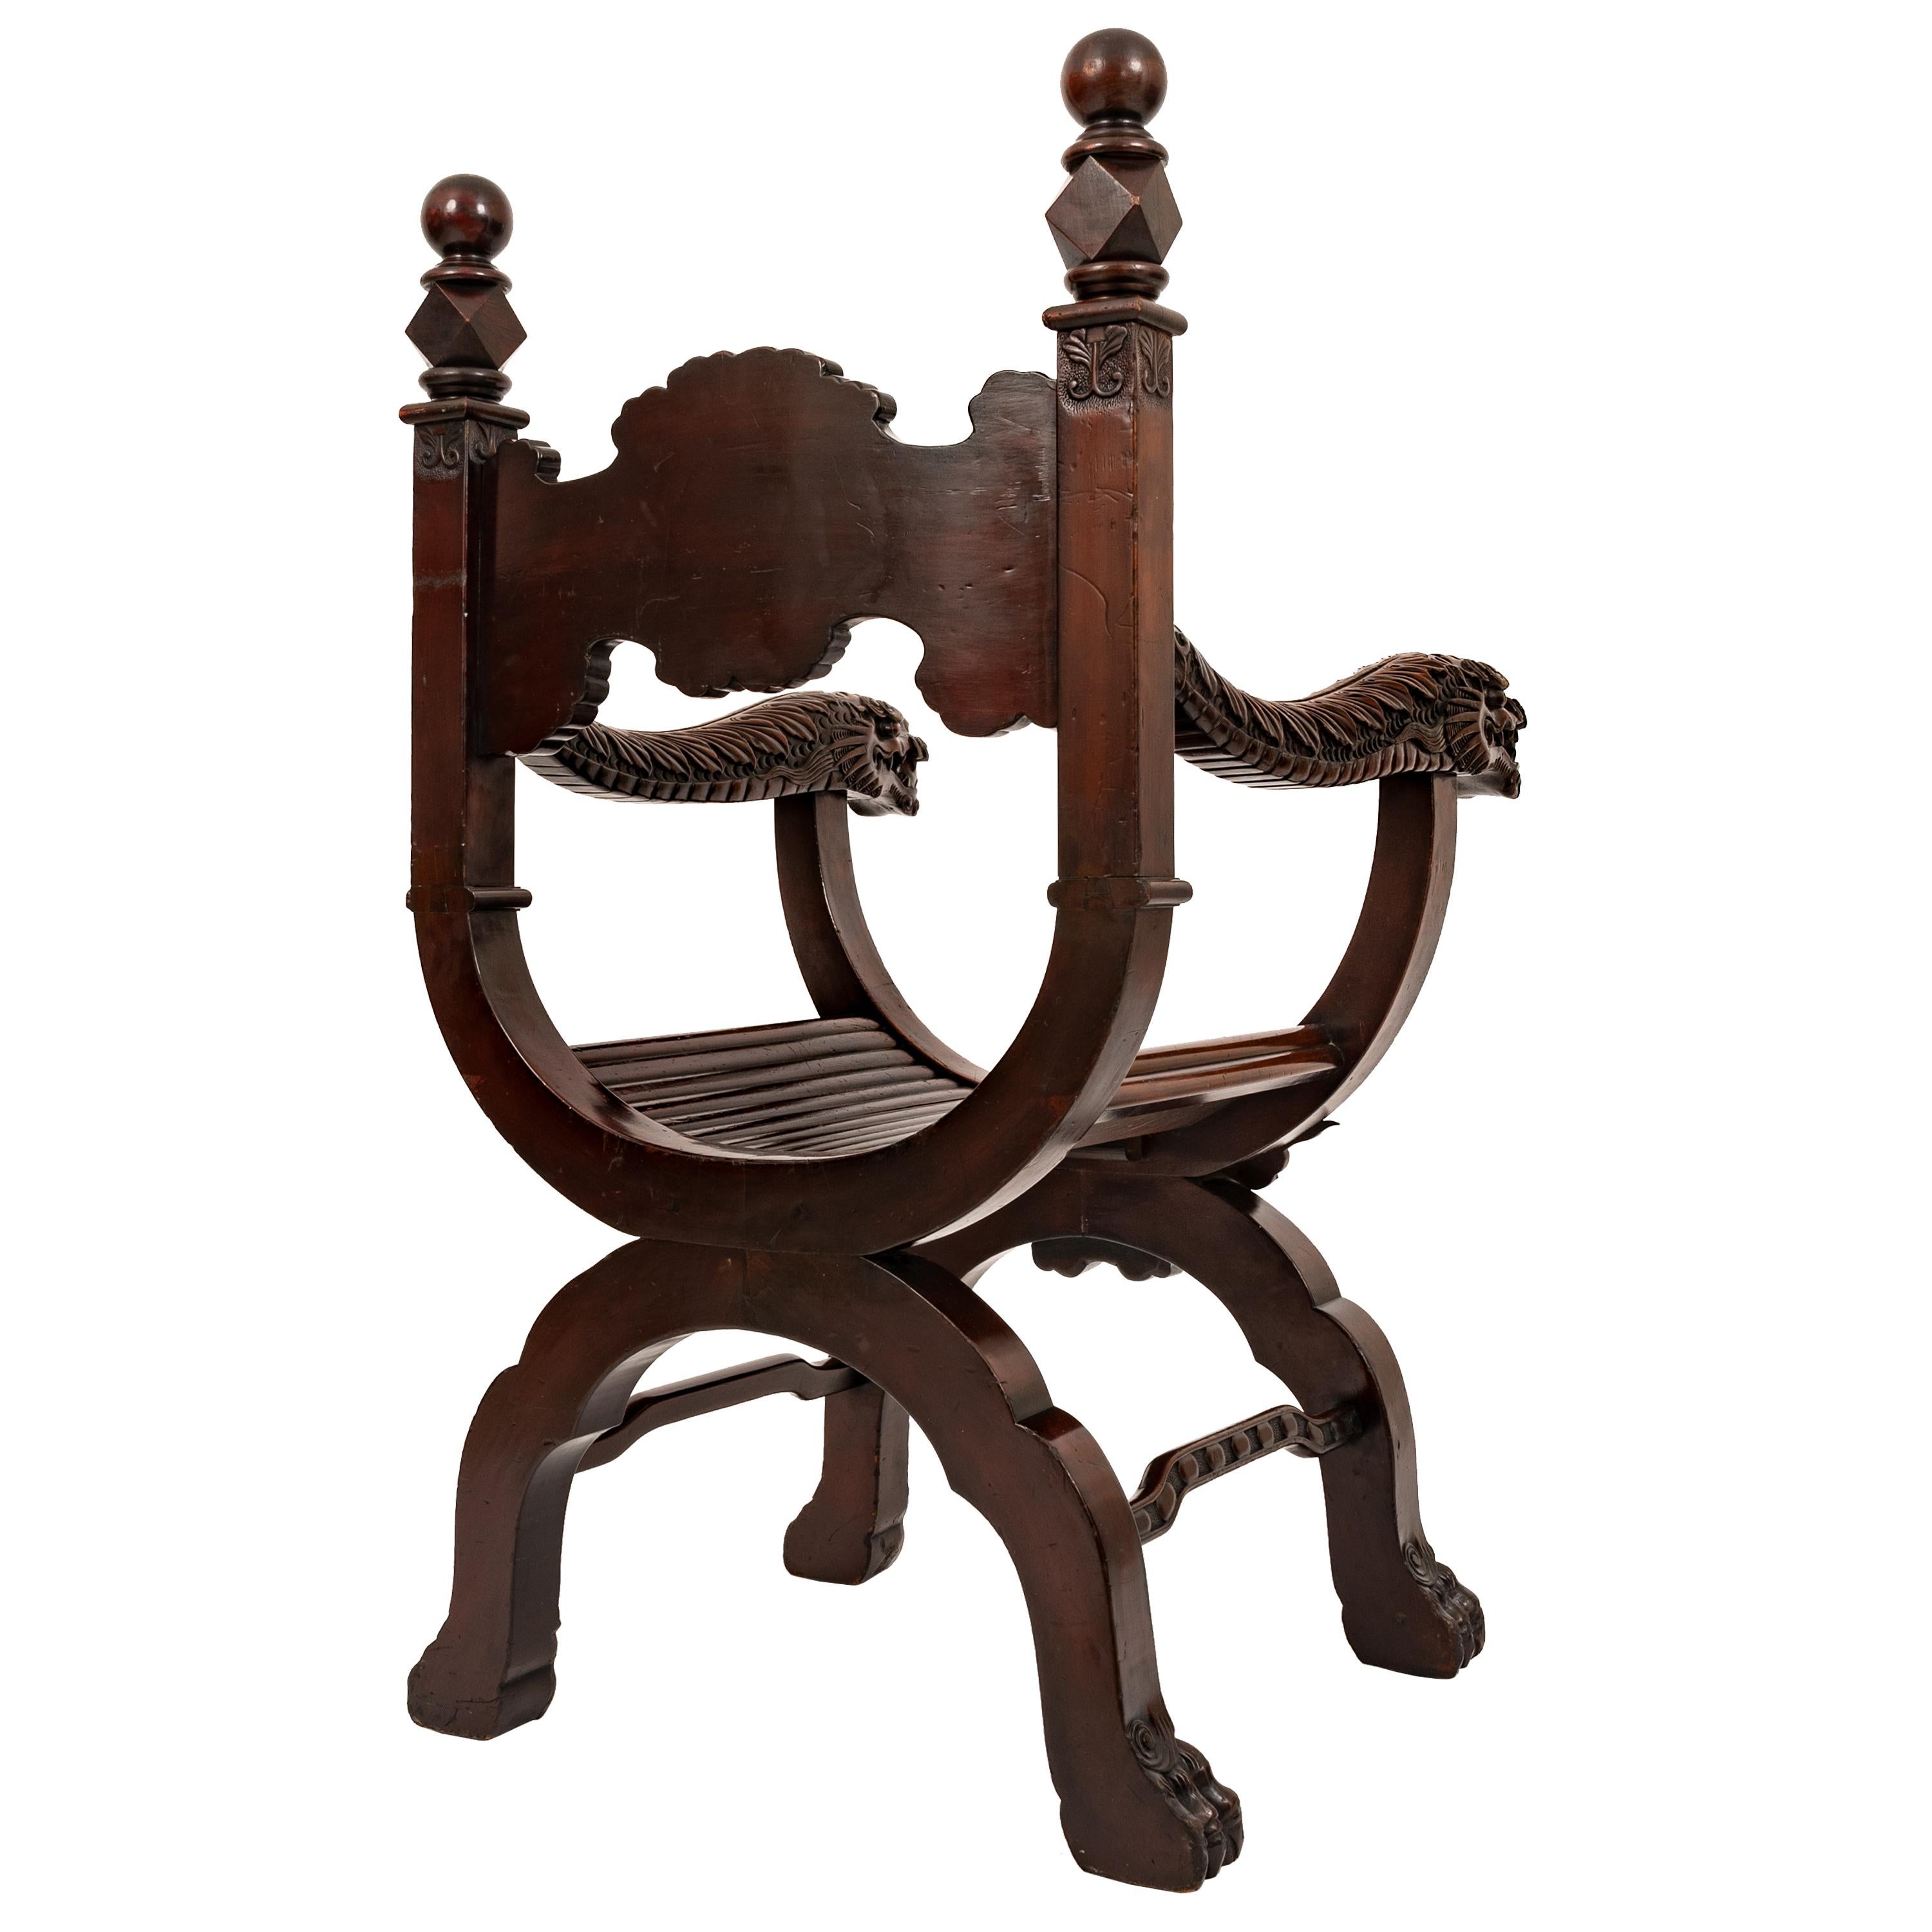 Antique American Robert Mitchell Carved Chinoiserie Savonarola Dragon Chair 1900 For Sale 3